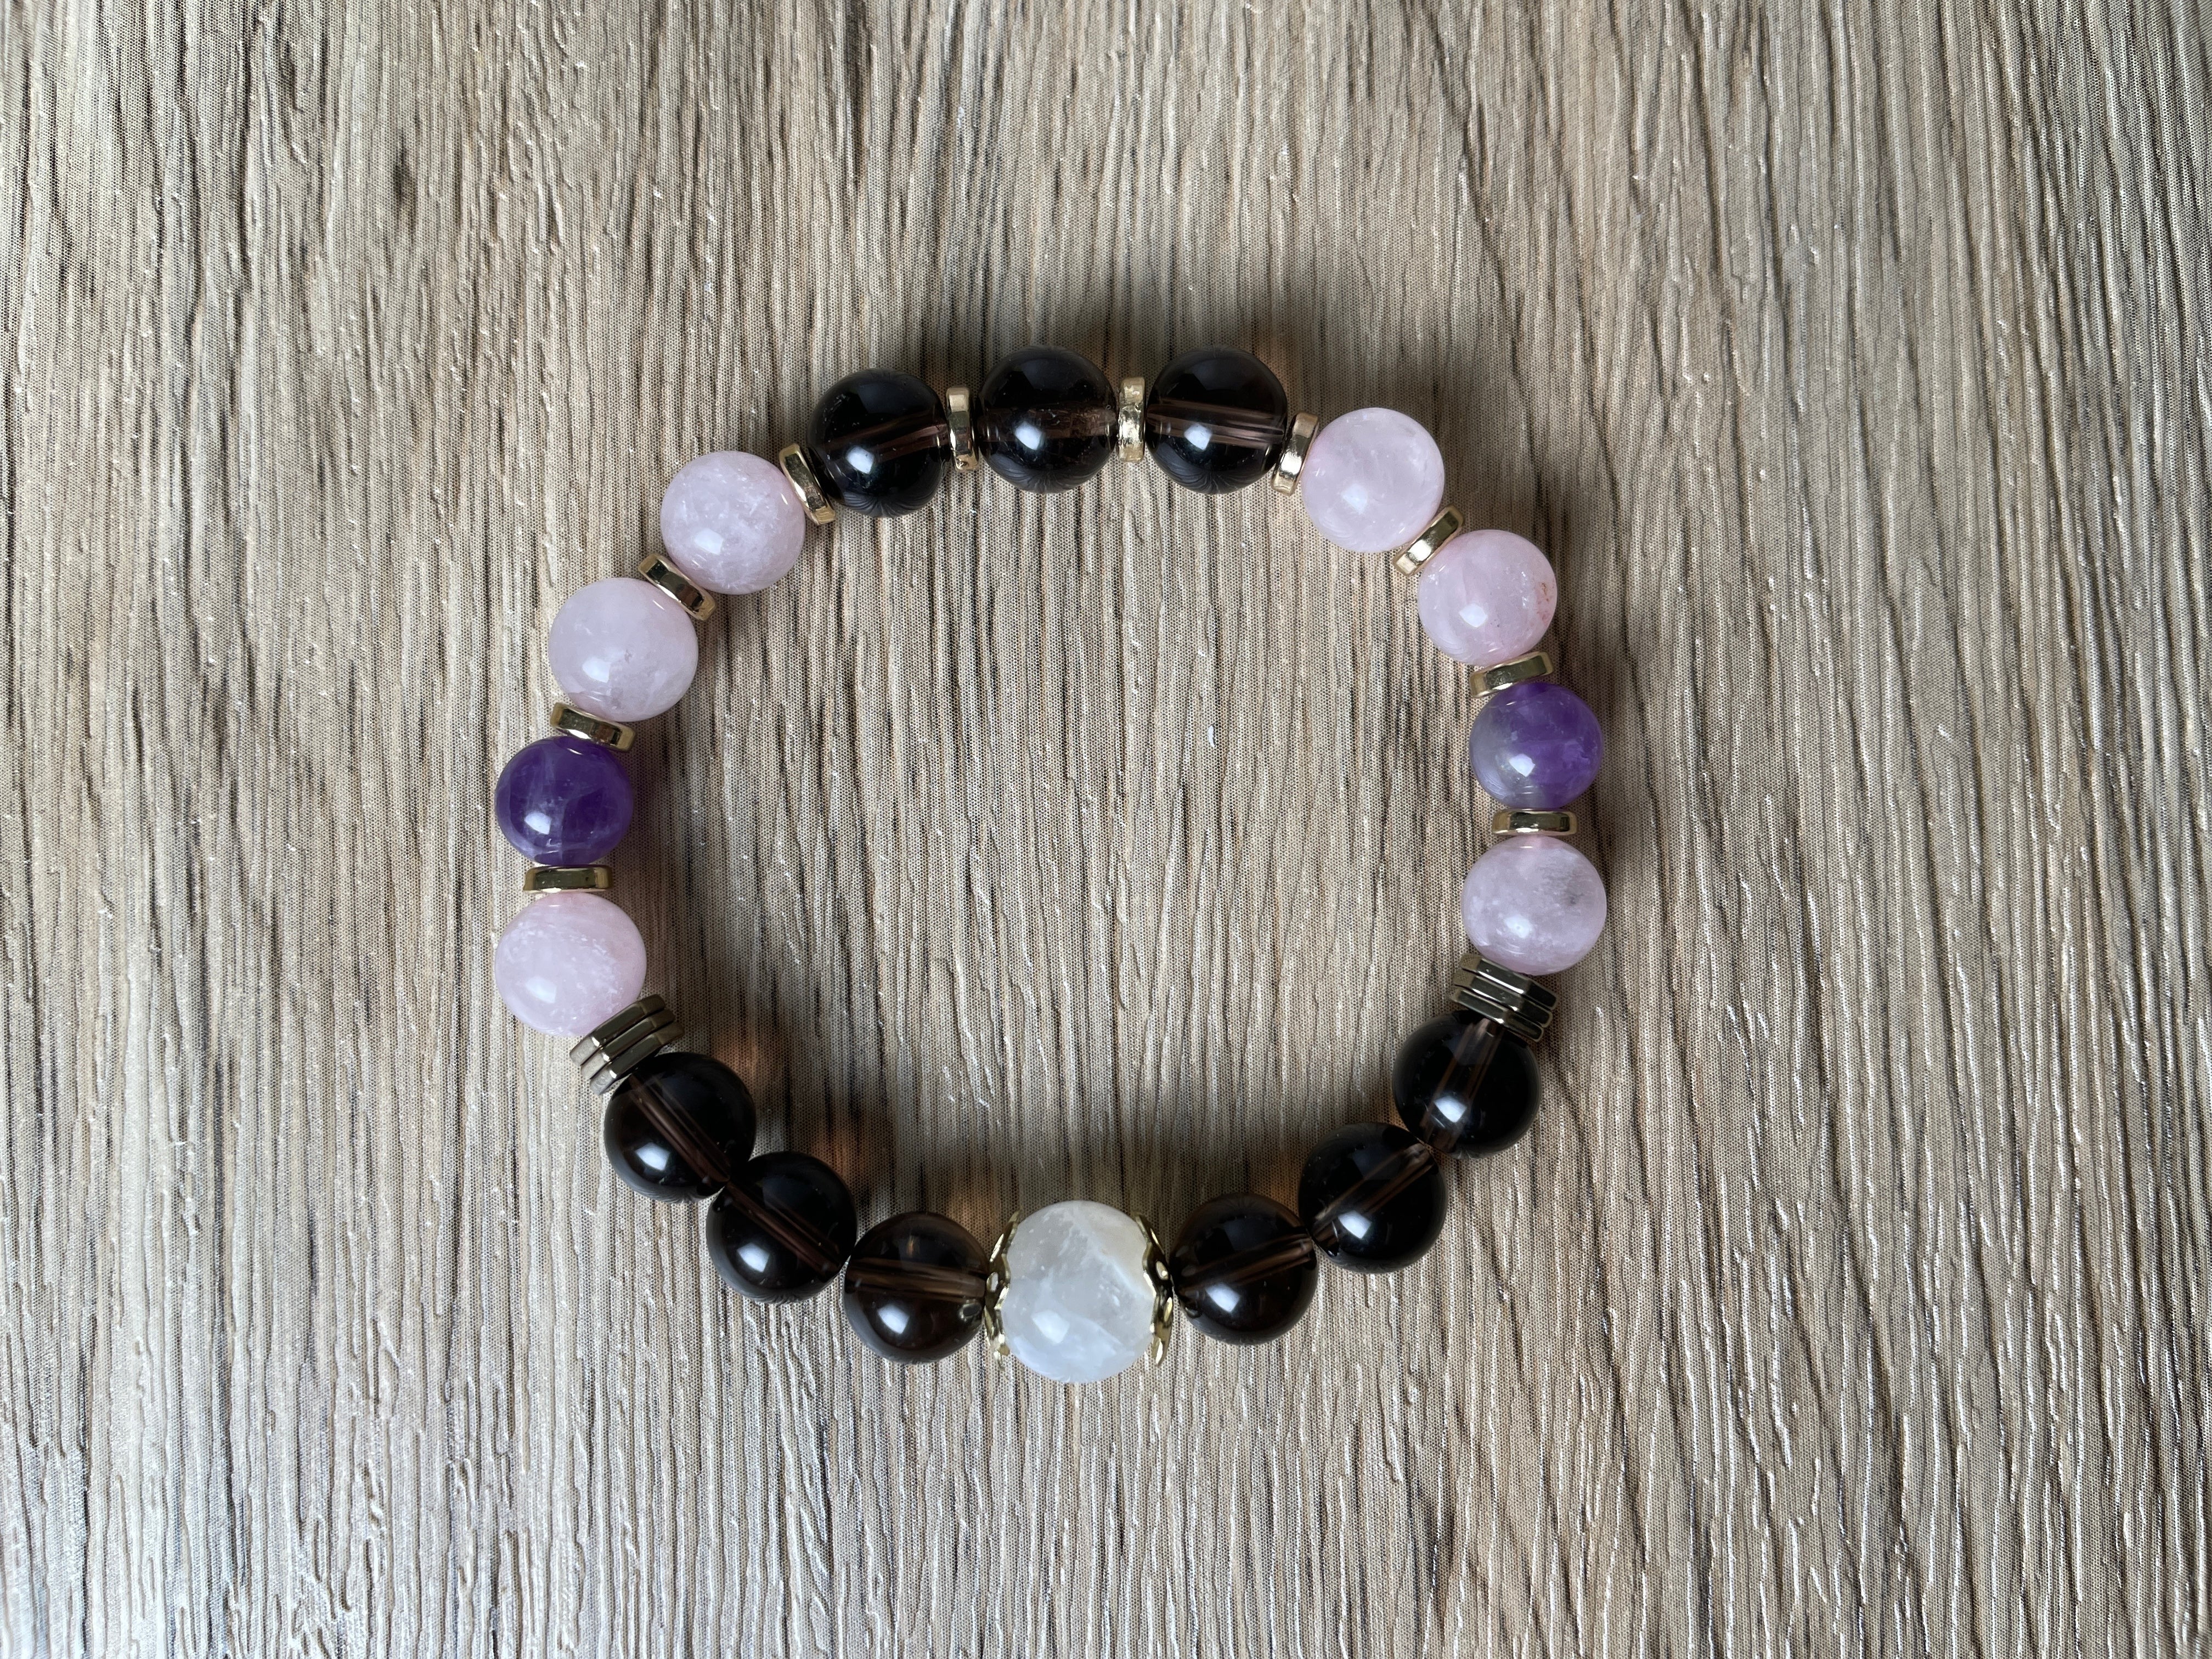 Buy Online Latest and Unique Grief & Loss Crystal Bracelet | Shop Best Spiritual Items - The Mystical Ritual